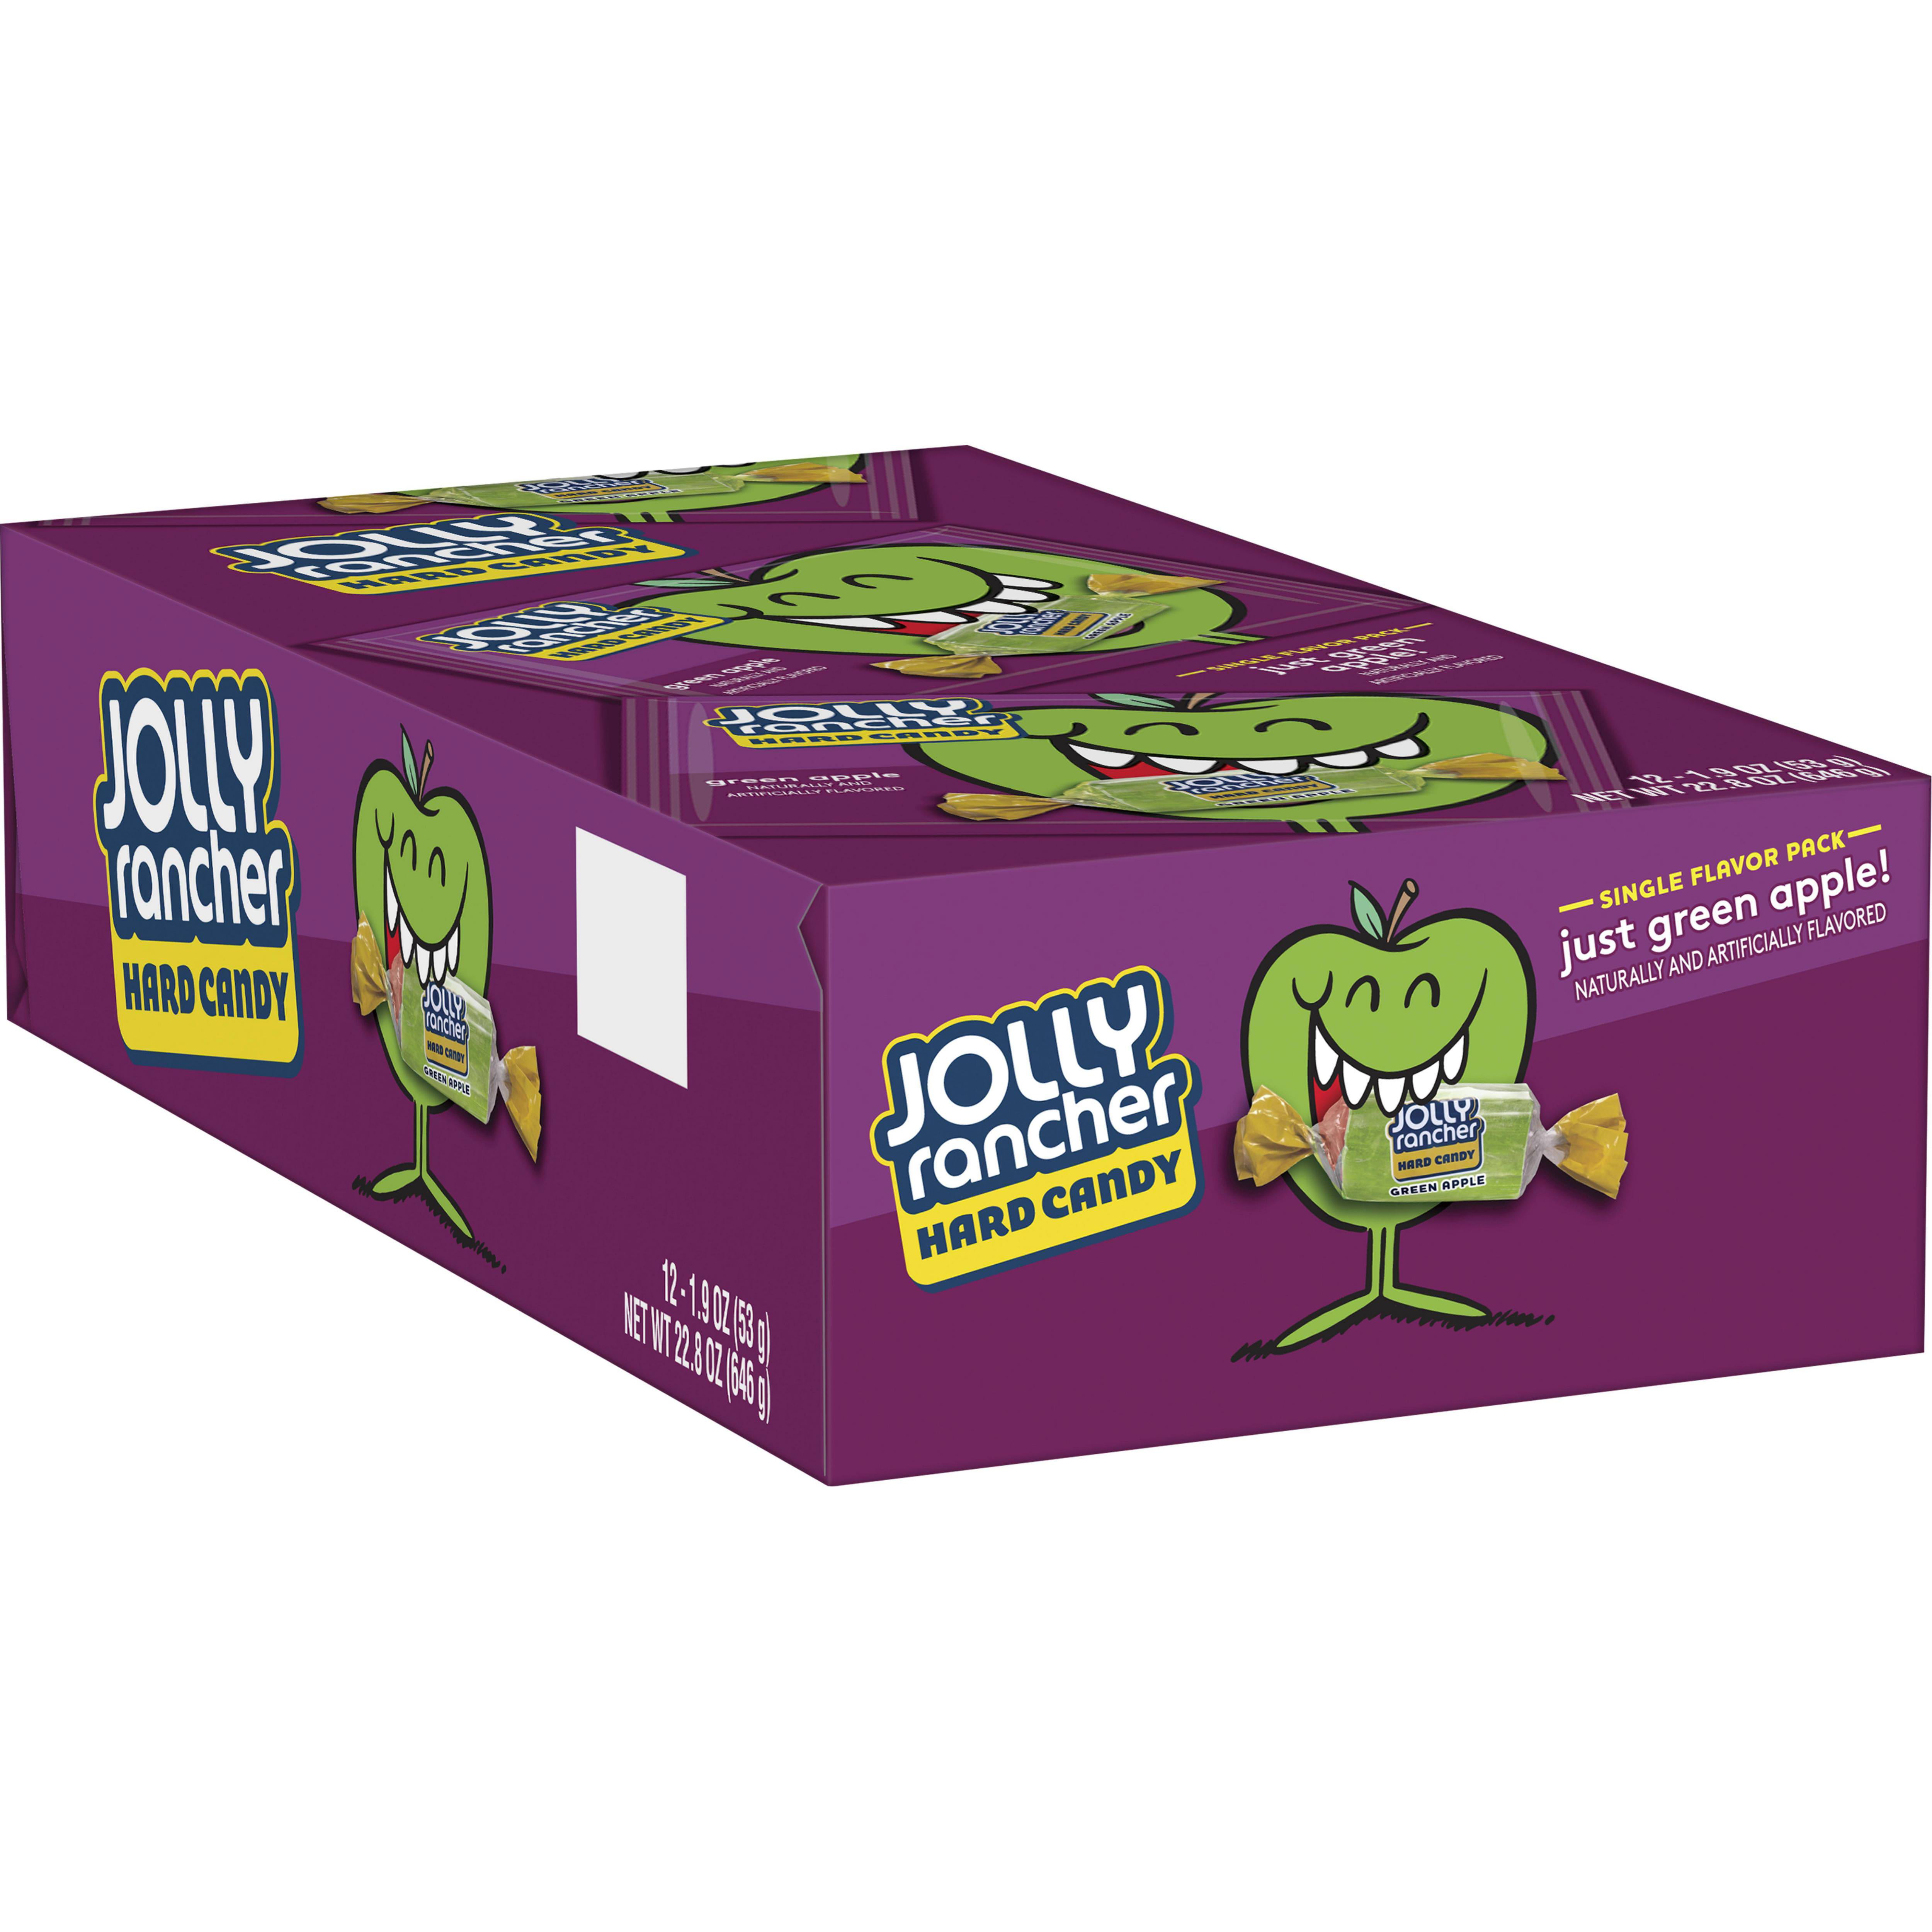 Jolly Rancher Crayon Soft Fruit Flavored Candy, Green Apple, Shop